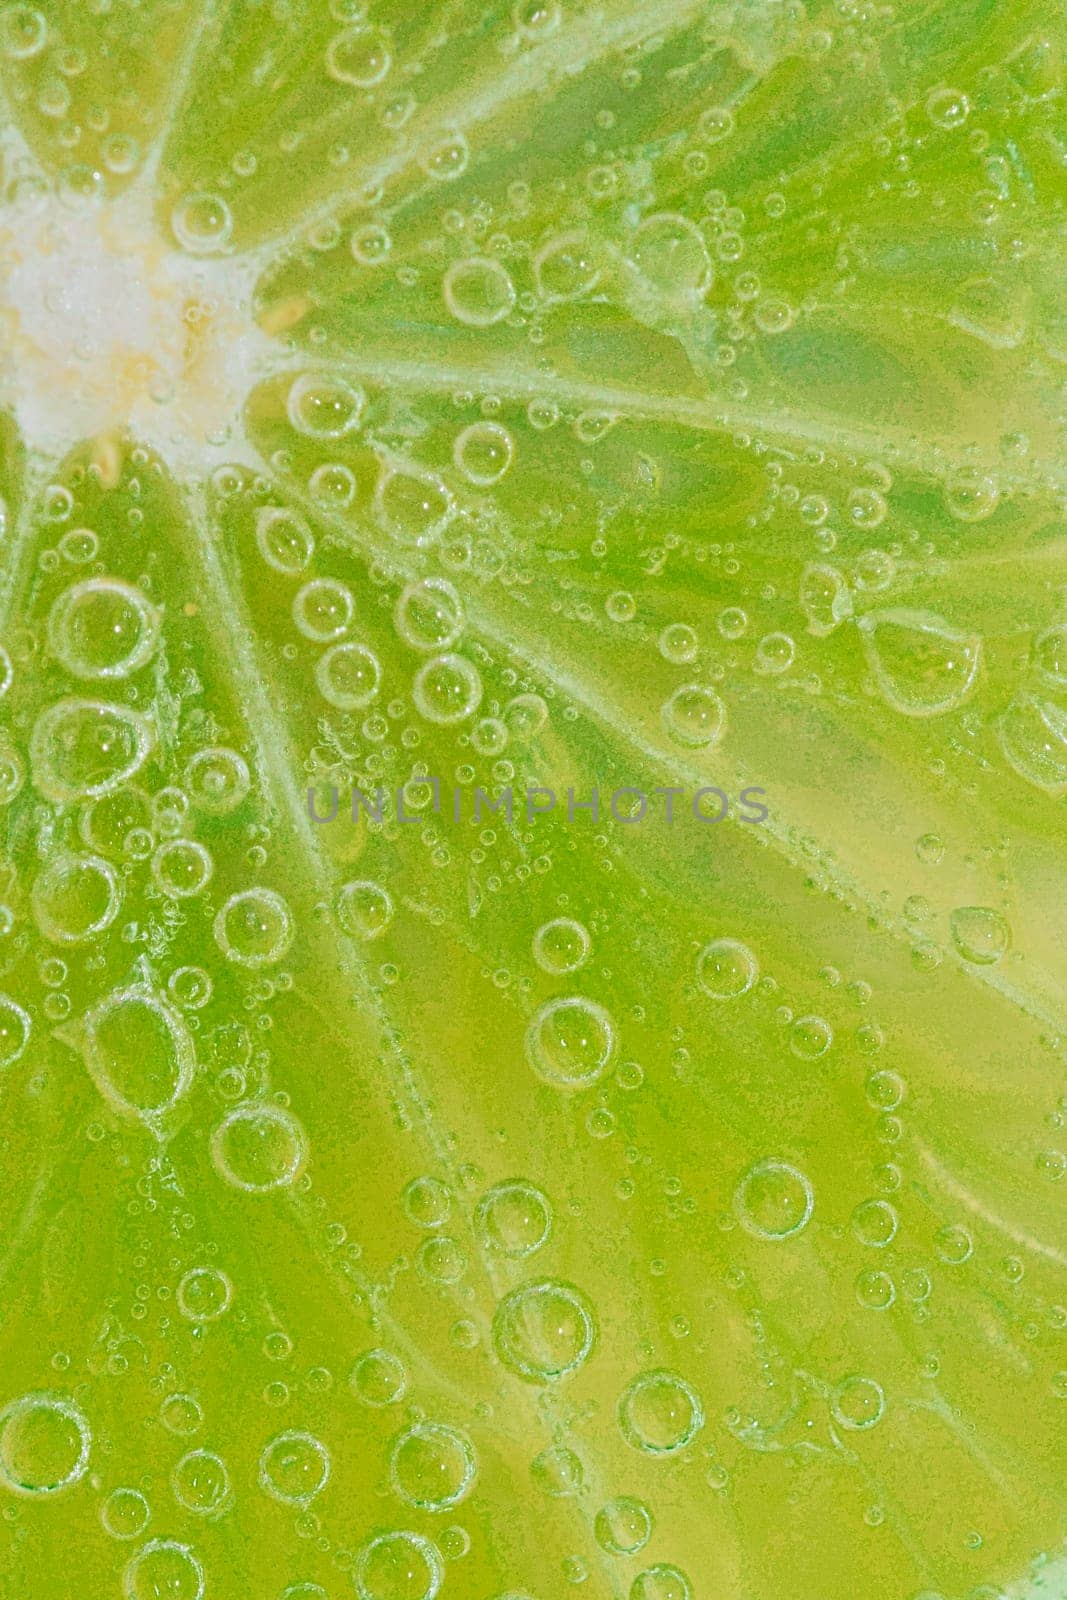 Close-up of a lime slice in liquid with bubbles. Slice of ripe lime in water. Close-up of fresh lime slice covered by bubbles. Macro vertical image